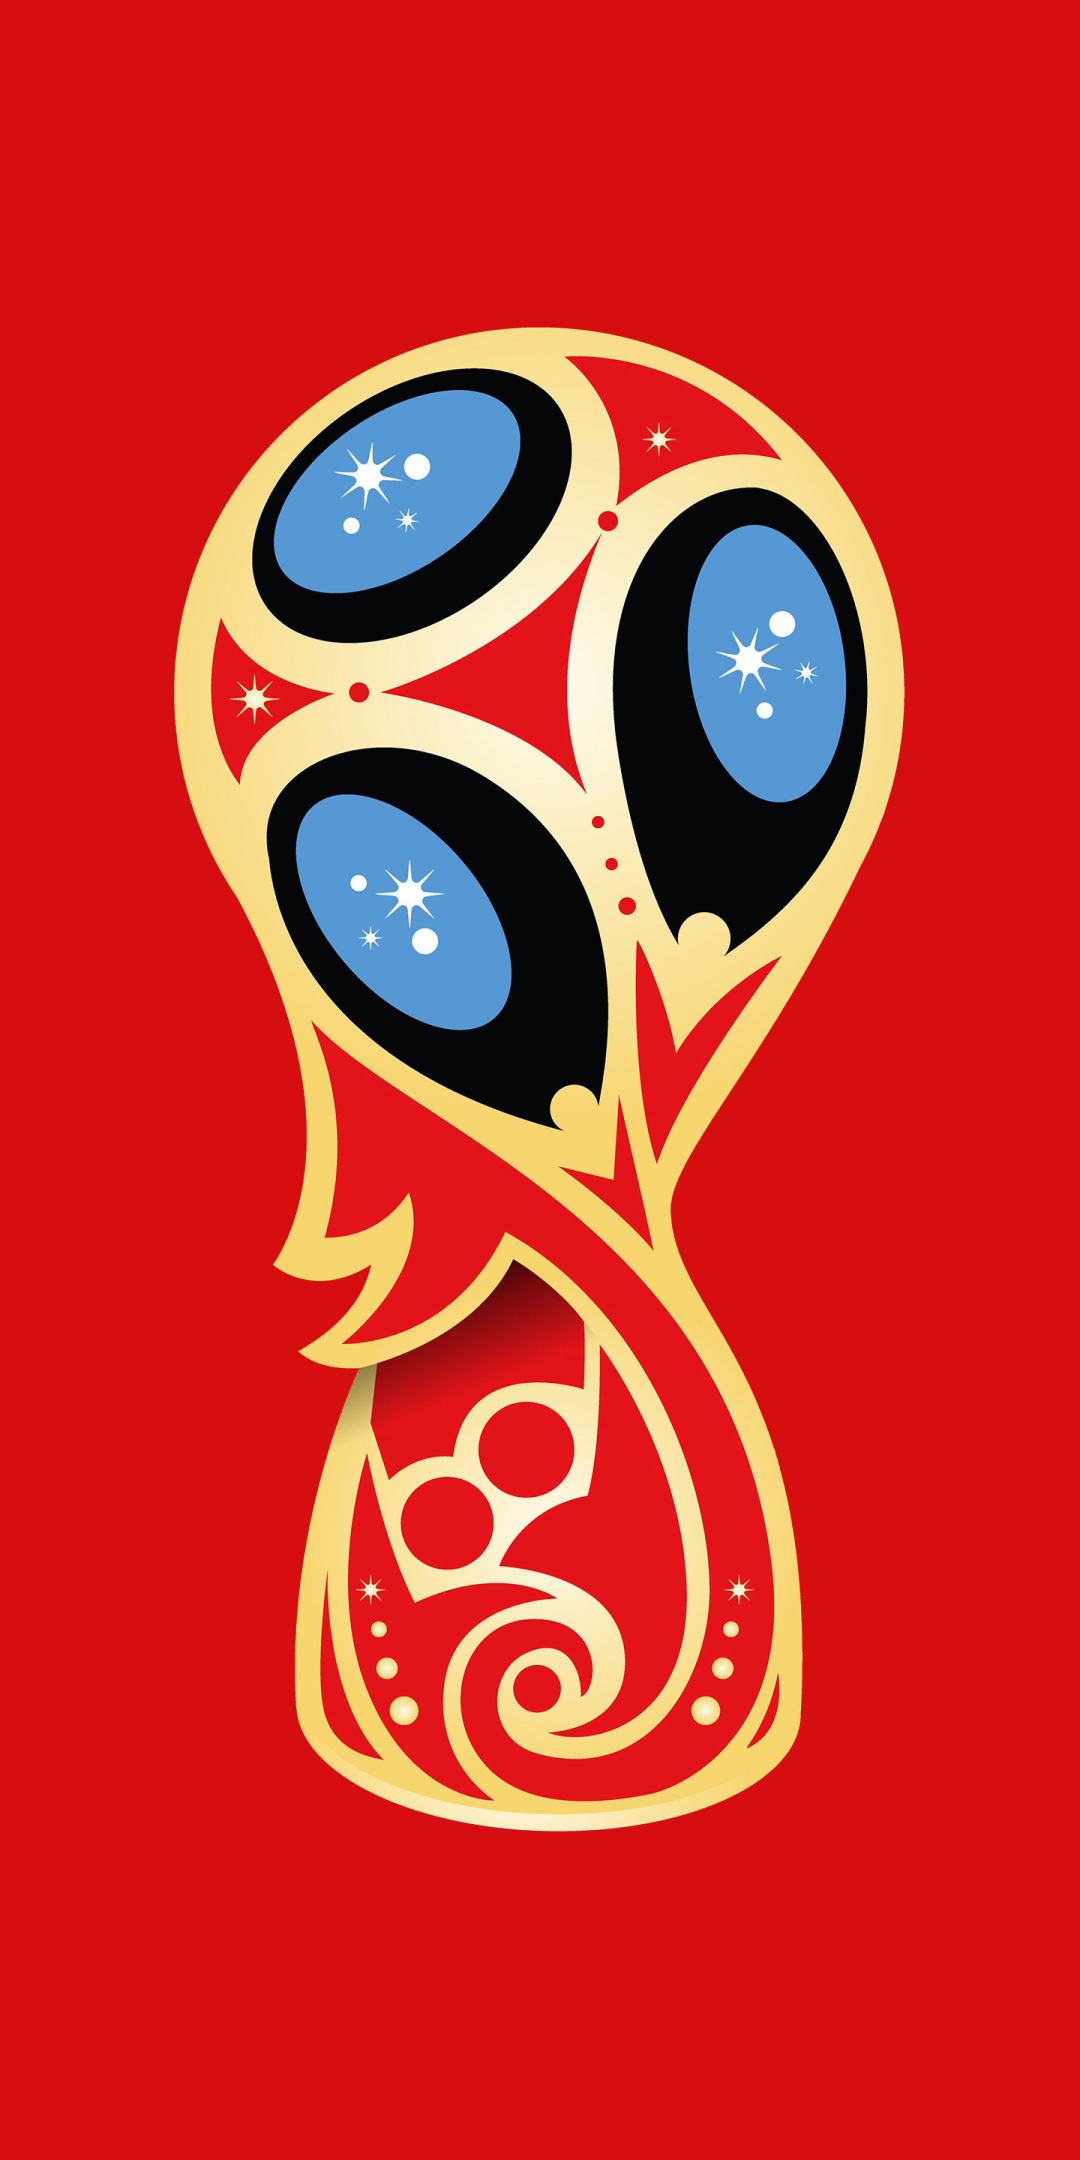 2018 FIFA World Cup, Russia, Trophy, Red, minimal, 1080x2160 wallpaper